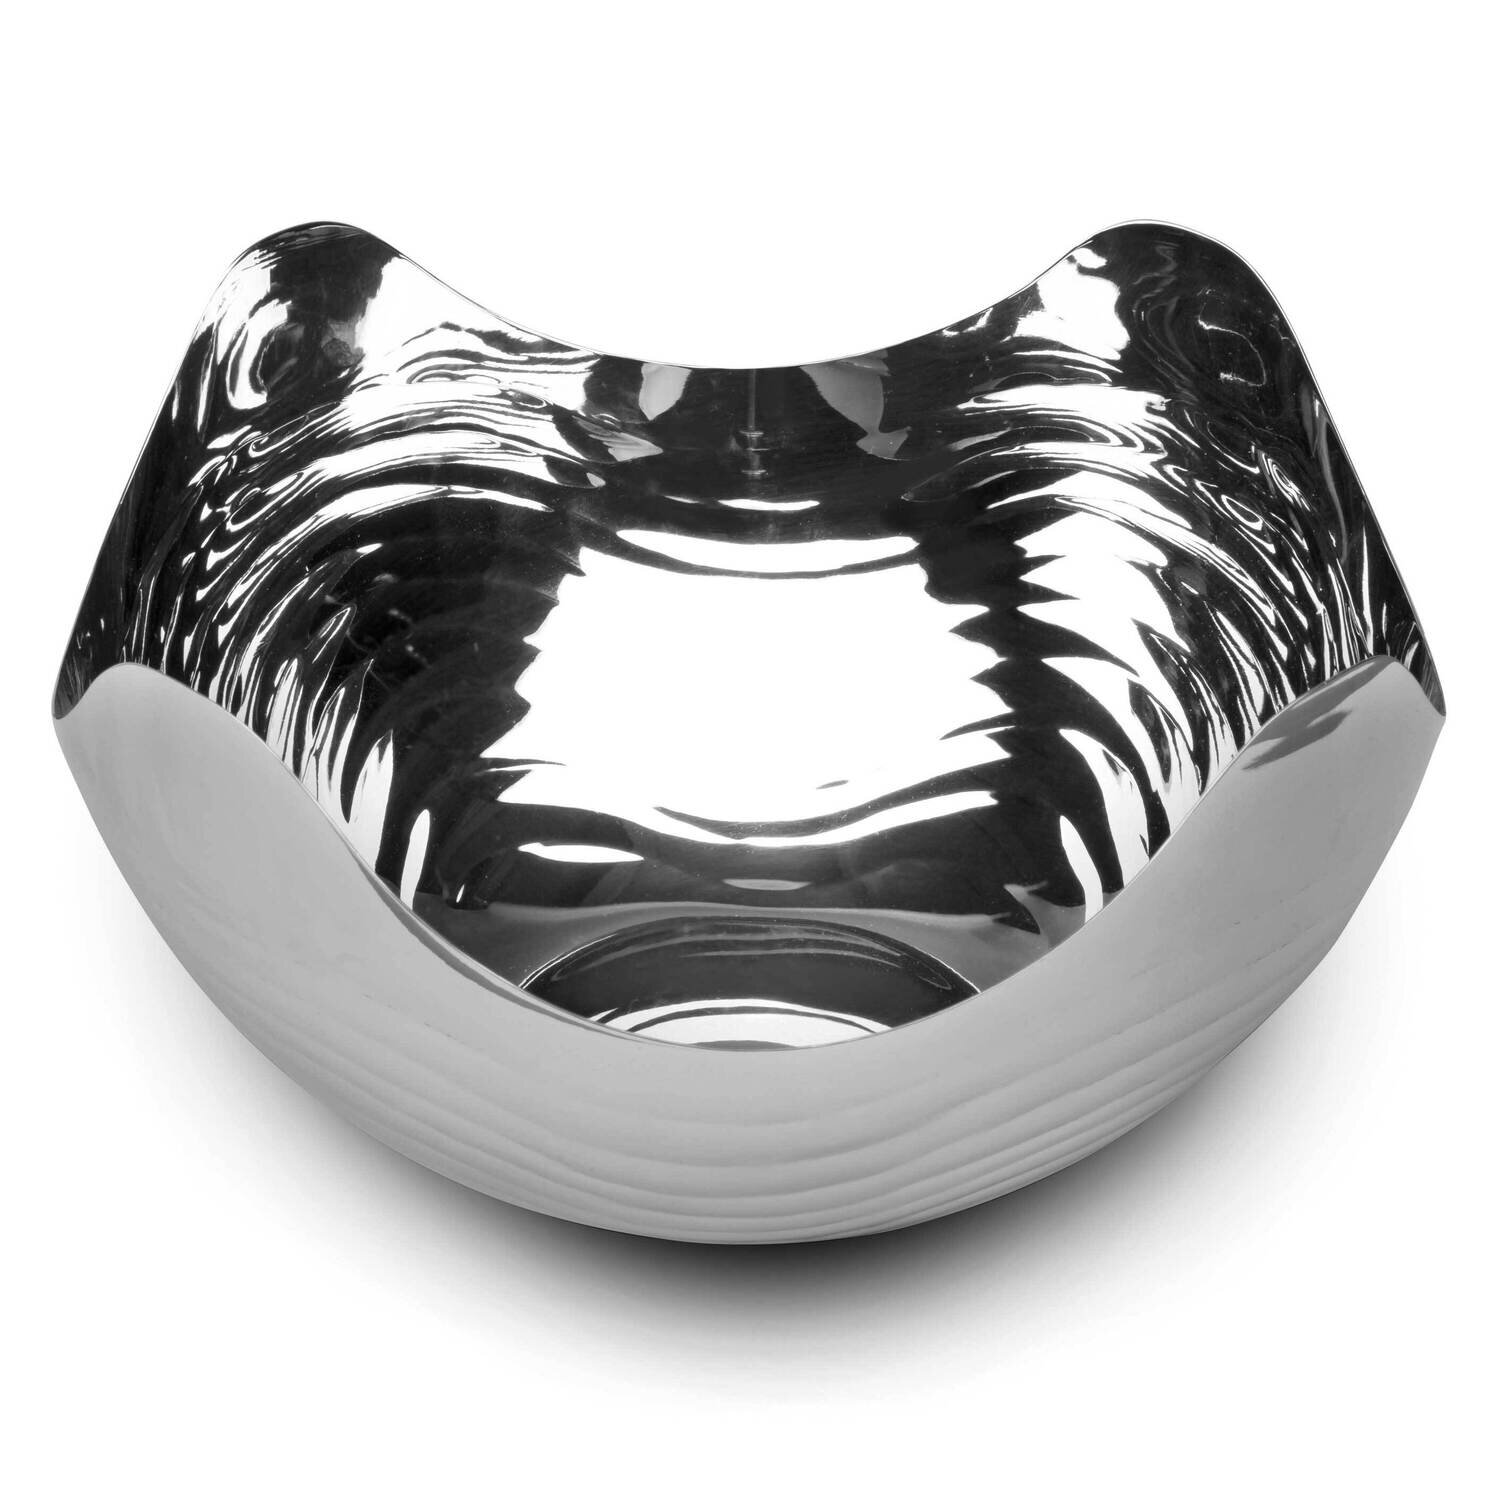 Stainless Steel Ripple Wave 10 inch Bowl GM22358